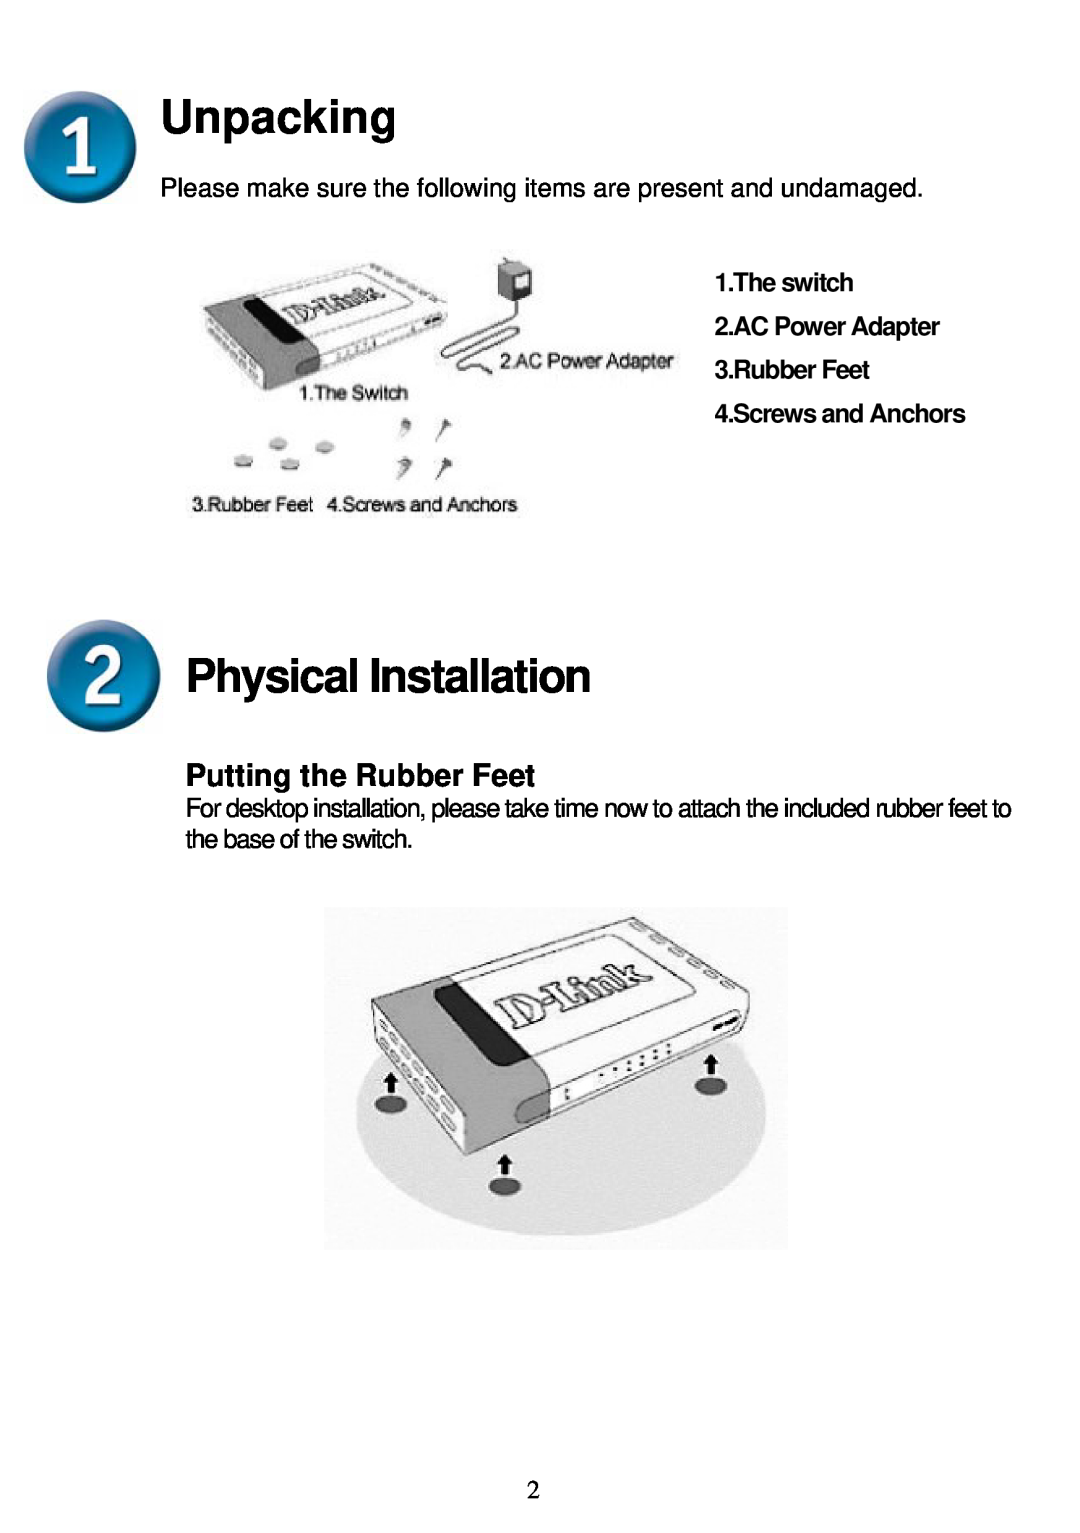 D-Link DES-1005D technical specifications Unpacking, Physical Installation, Putting the Rubber Feet, The switch 